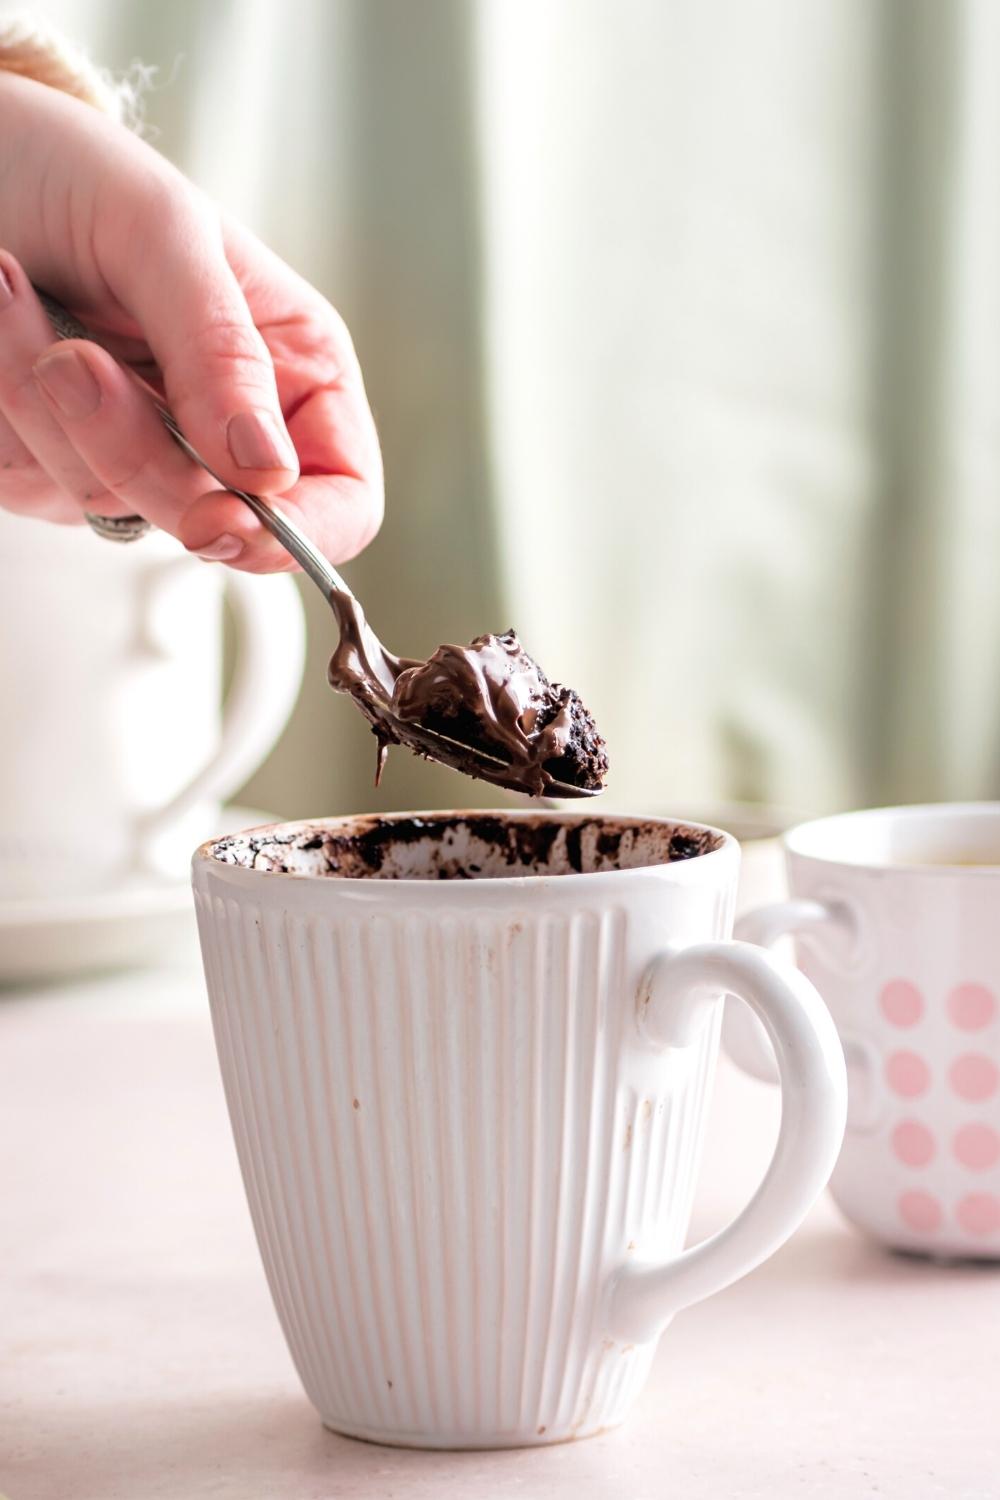 A hand holding a spoon that has a scoop of Nutella mug cake on it over a white mug that is filled with the cake.